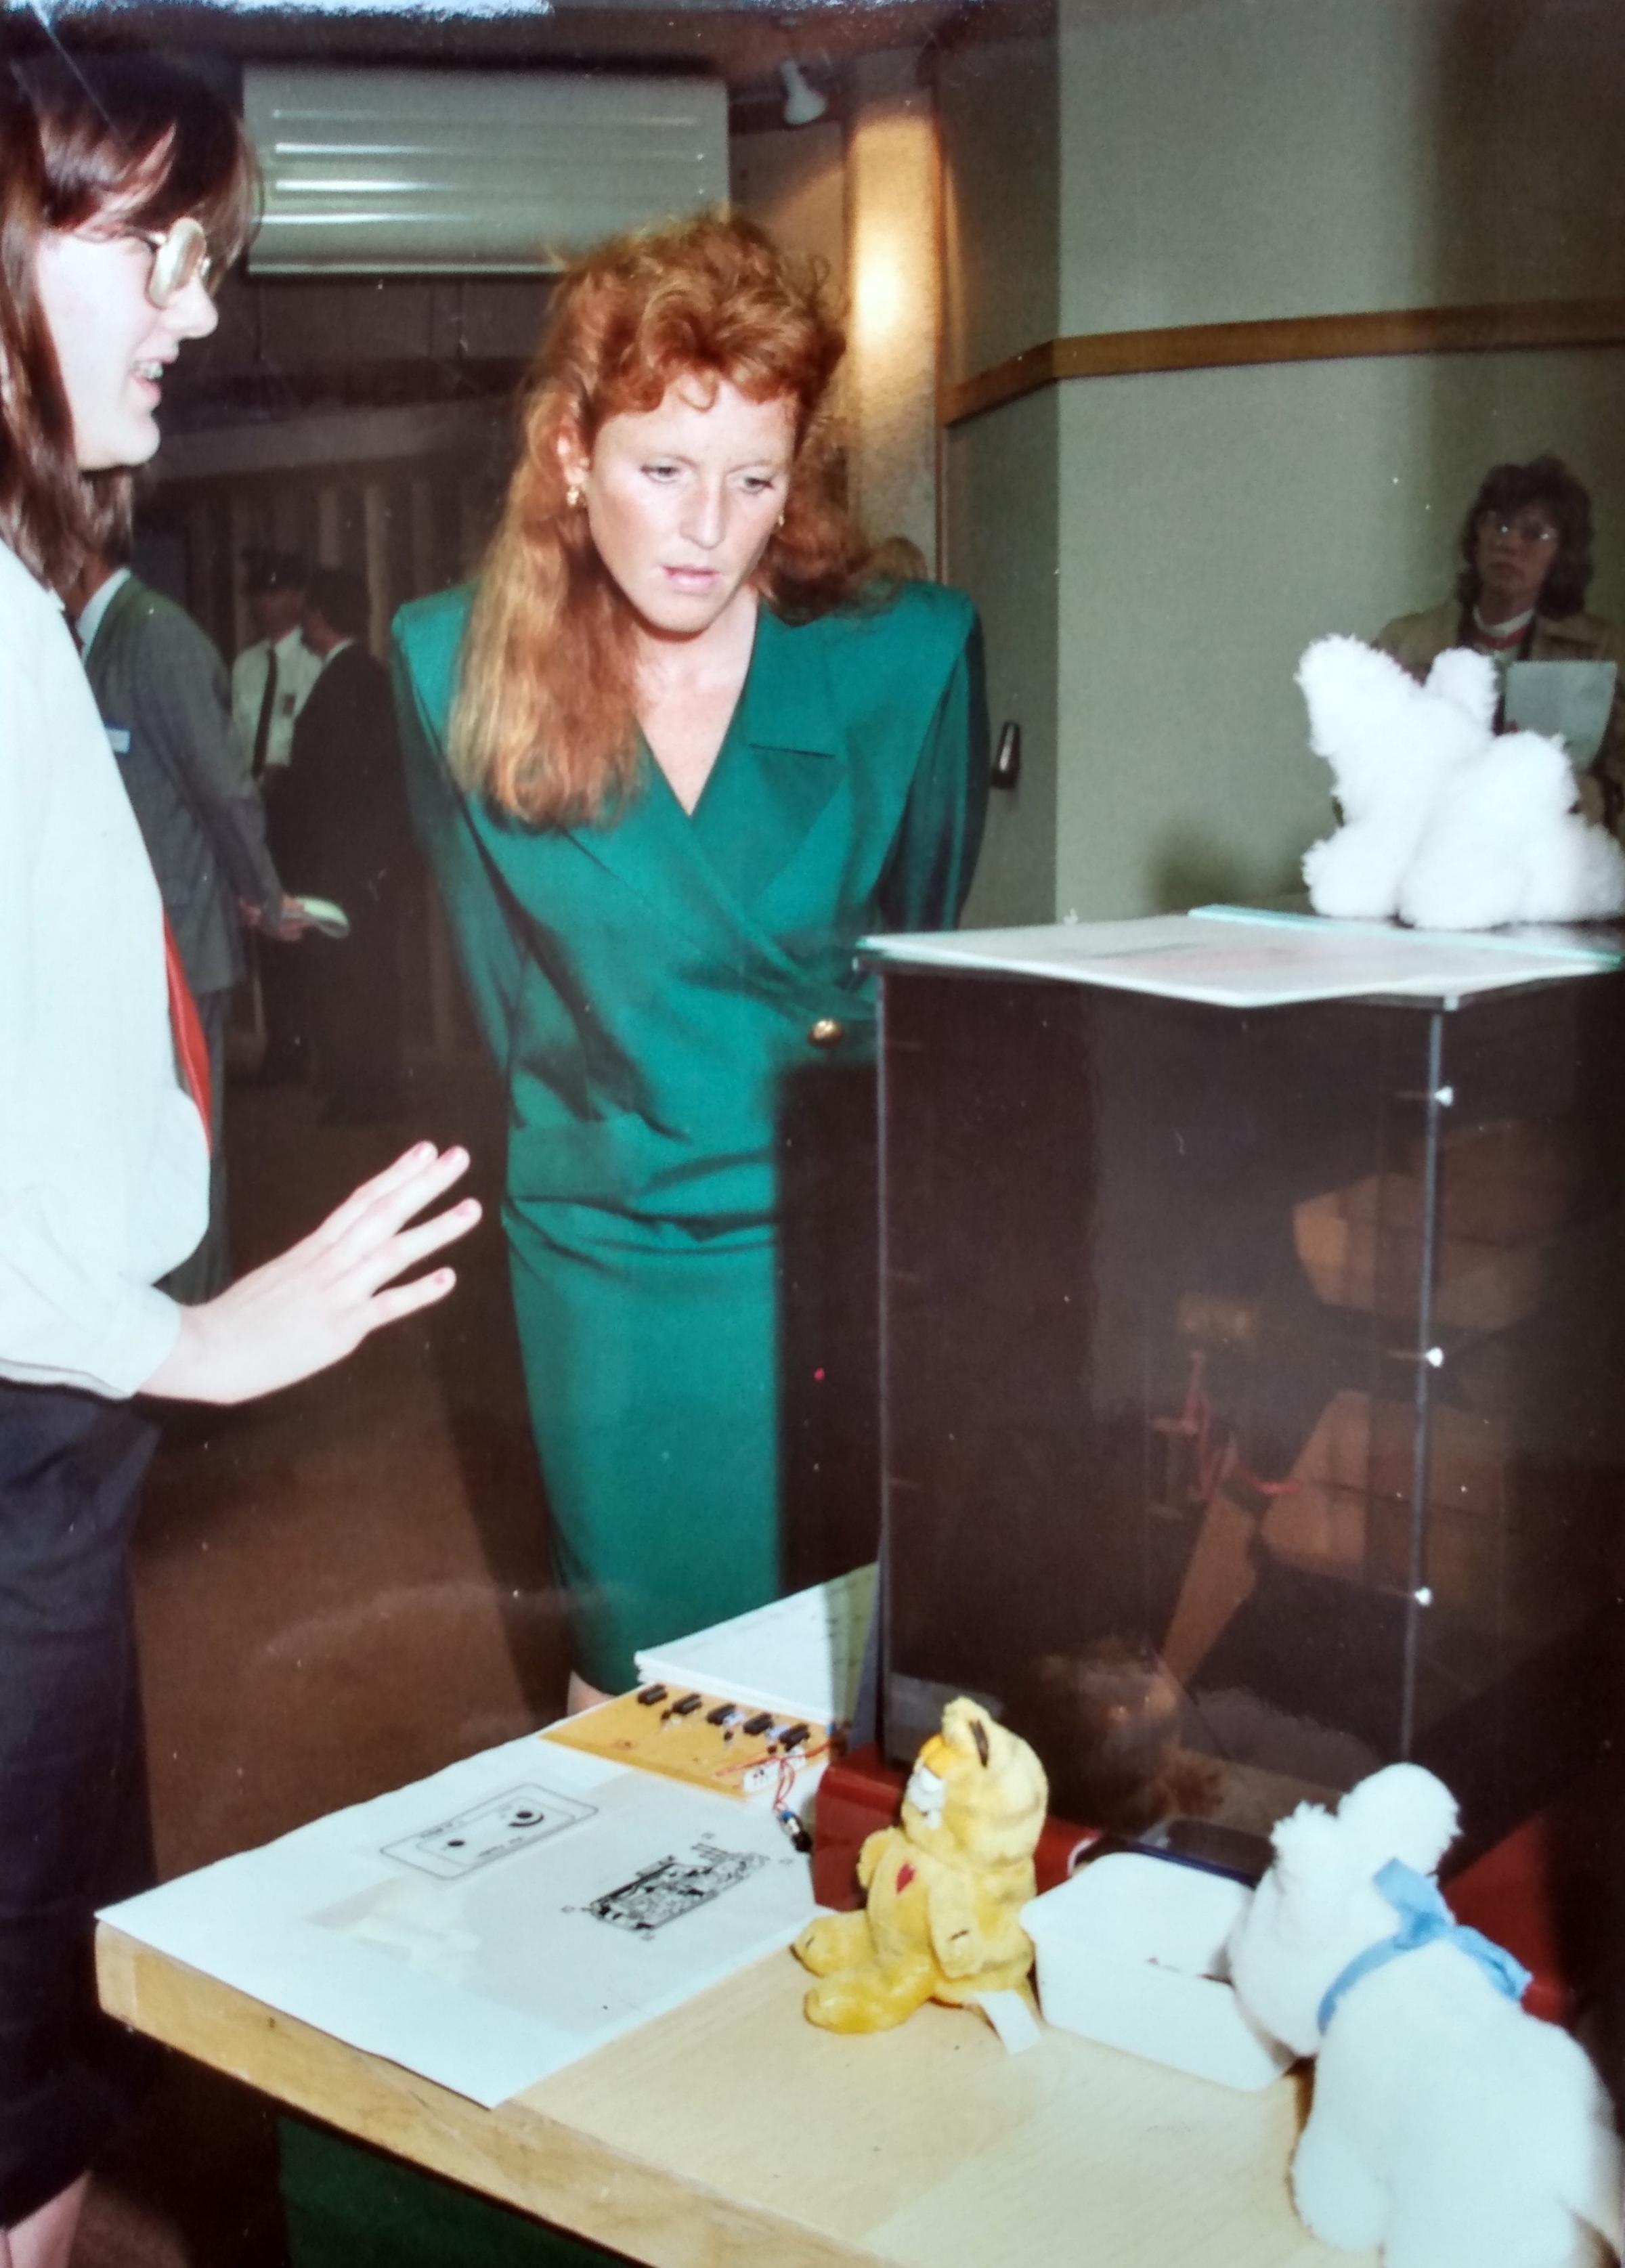 The Duchess of York paid a visit to the school in July 1989. Student Joanne White is explaining one of the science models on display